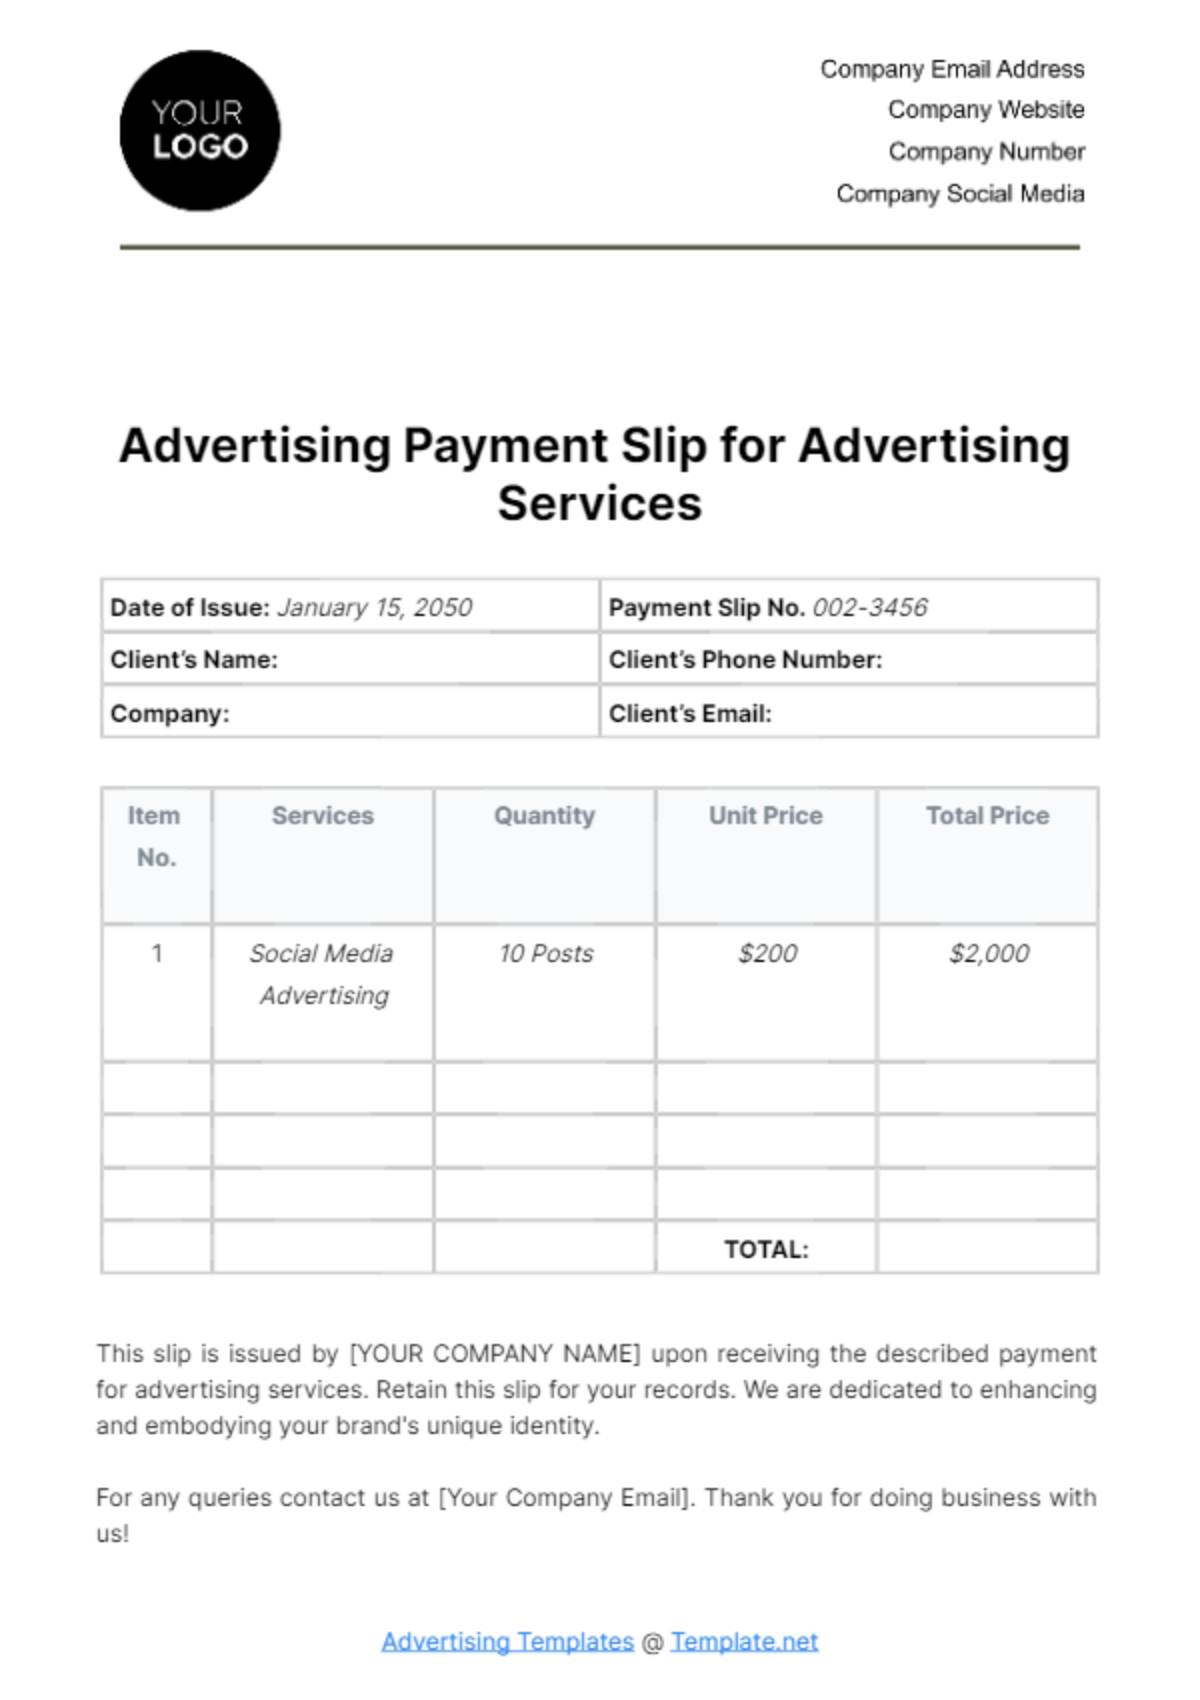 Free Advertising Payment Slip for Advertising Services Template